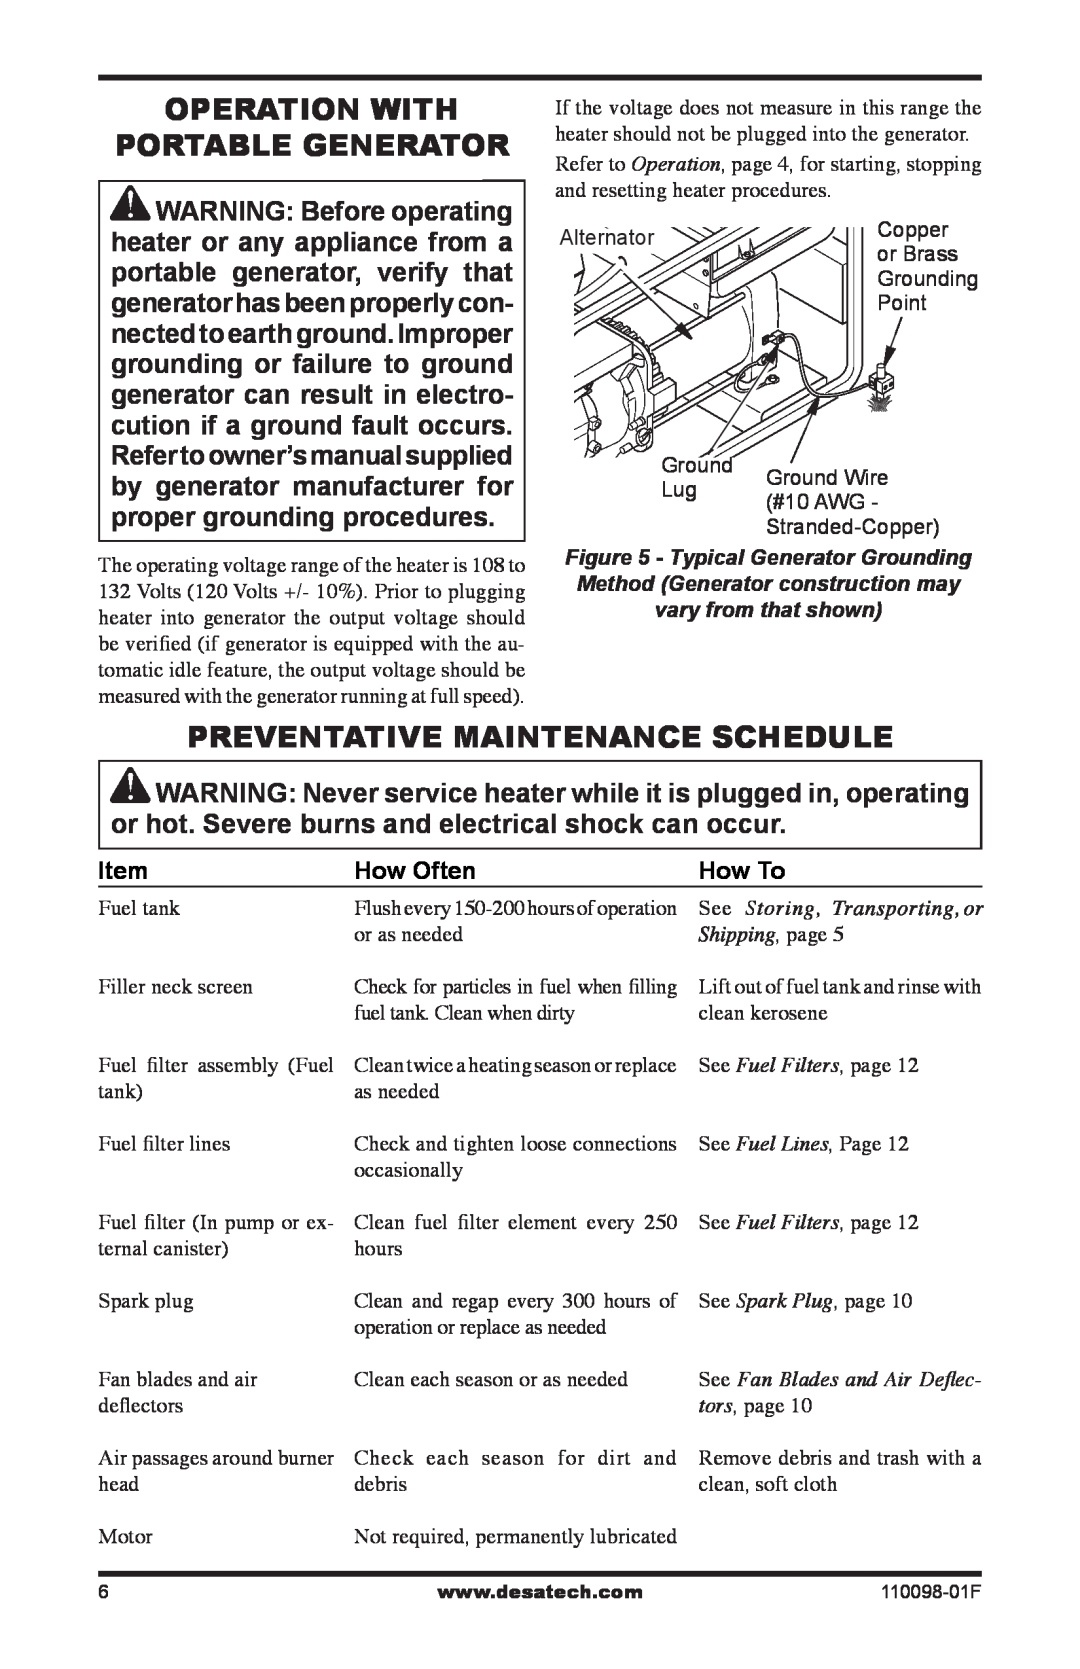 Desa KEROSENE HIGH PRESSURE PORTABLE FORCED AIR HEATERS Preventative Maintenance Schedule, How Often, How To, See Storing 